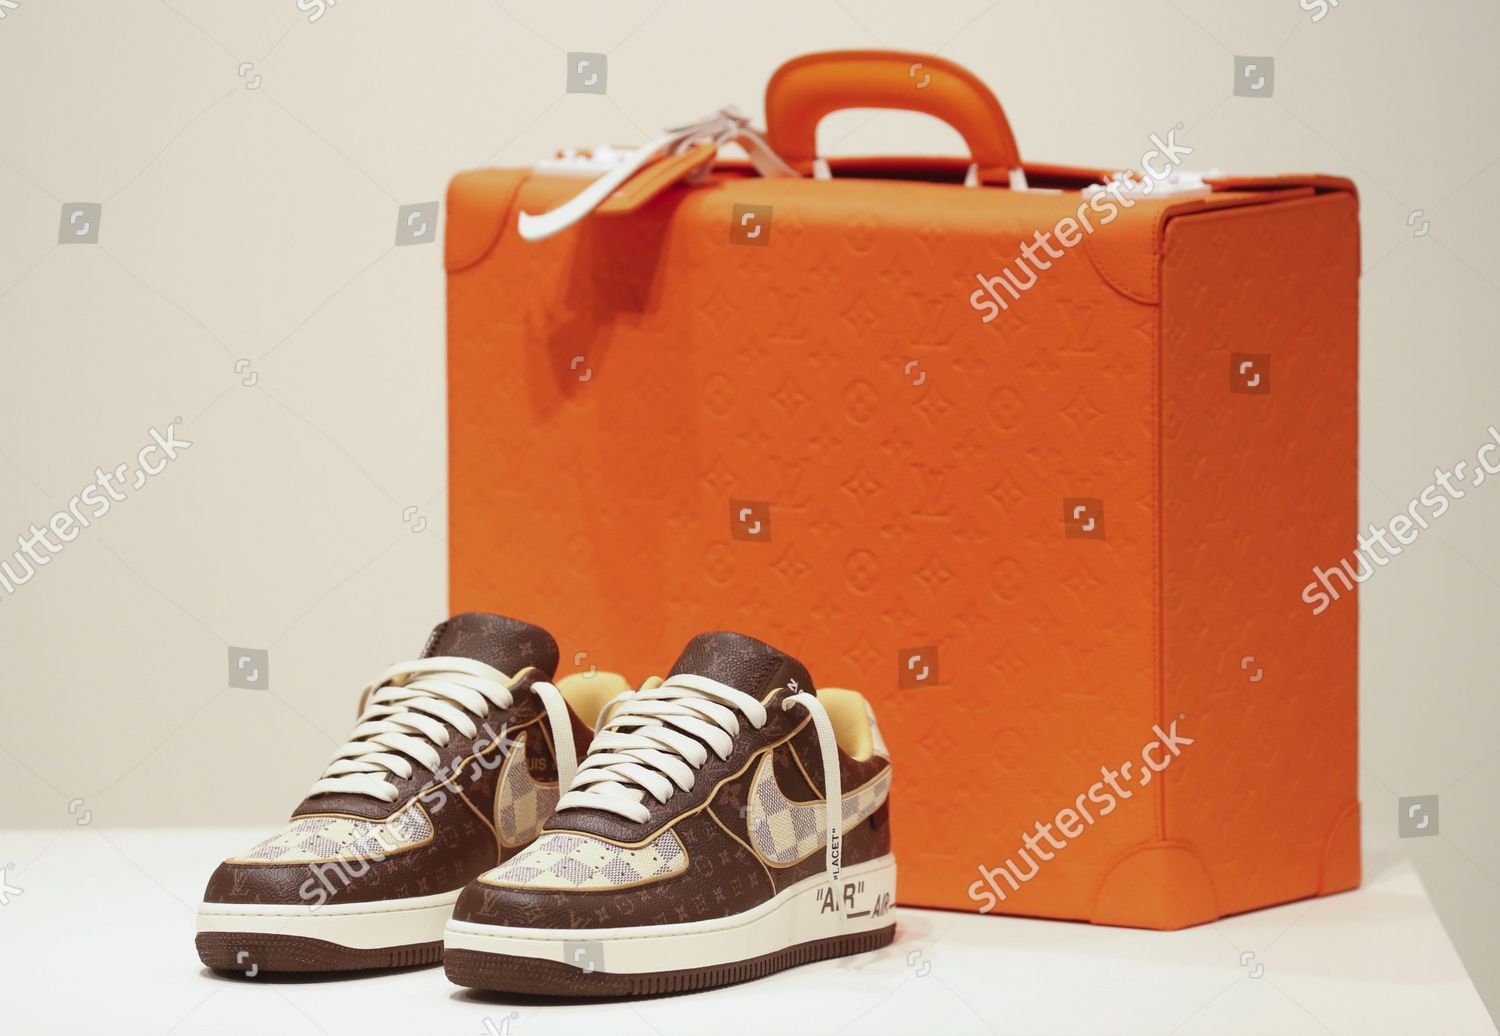 Louis Vuitton Nike Expression Air Force Editorial Stock Photo